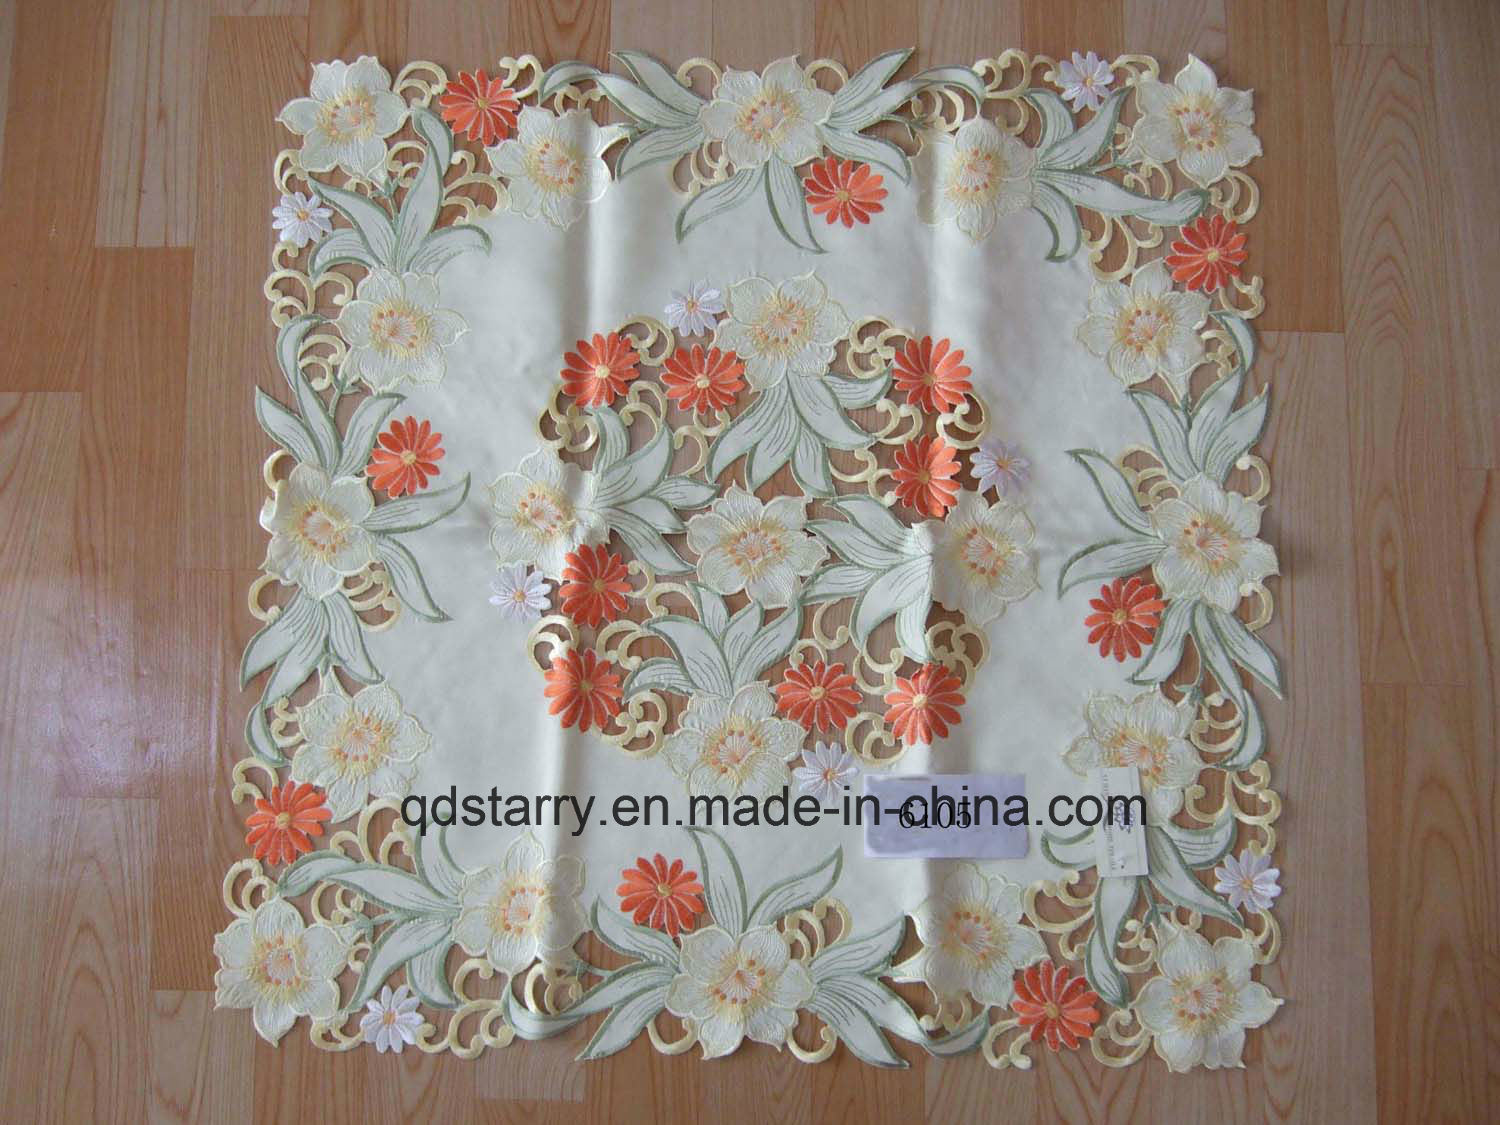 Lily Flower Embroidery Tablecloth 6105